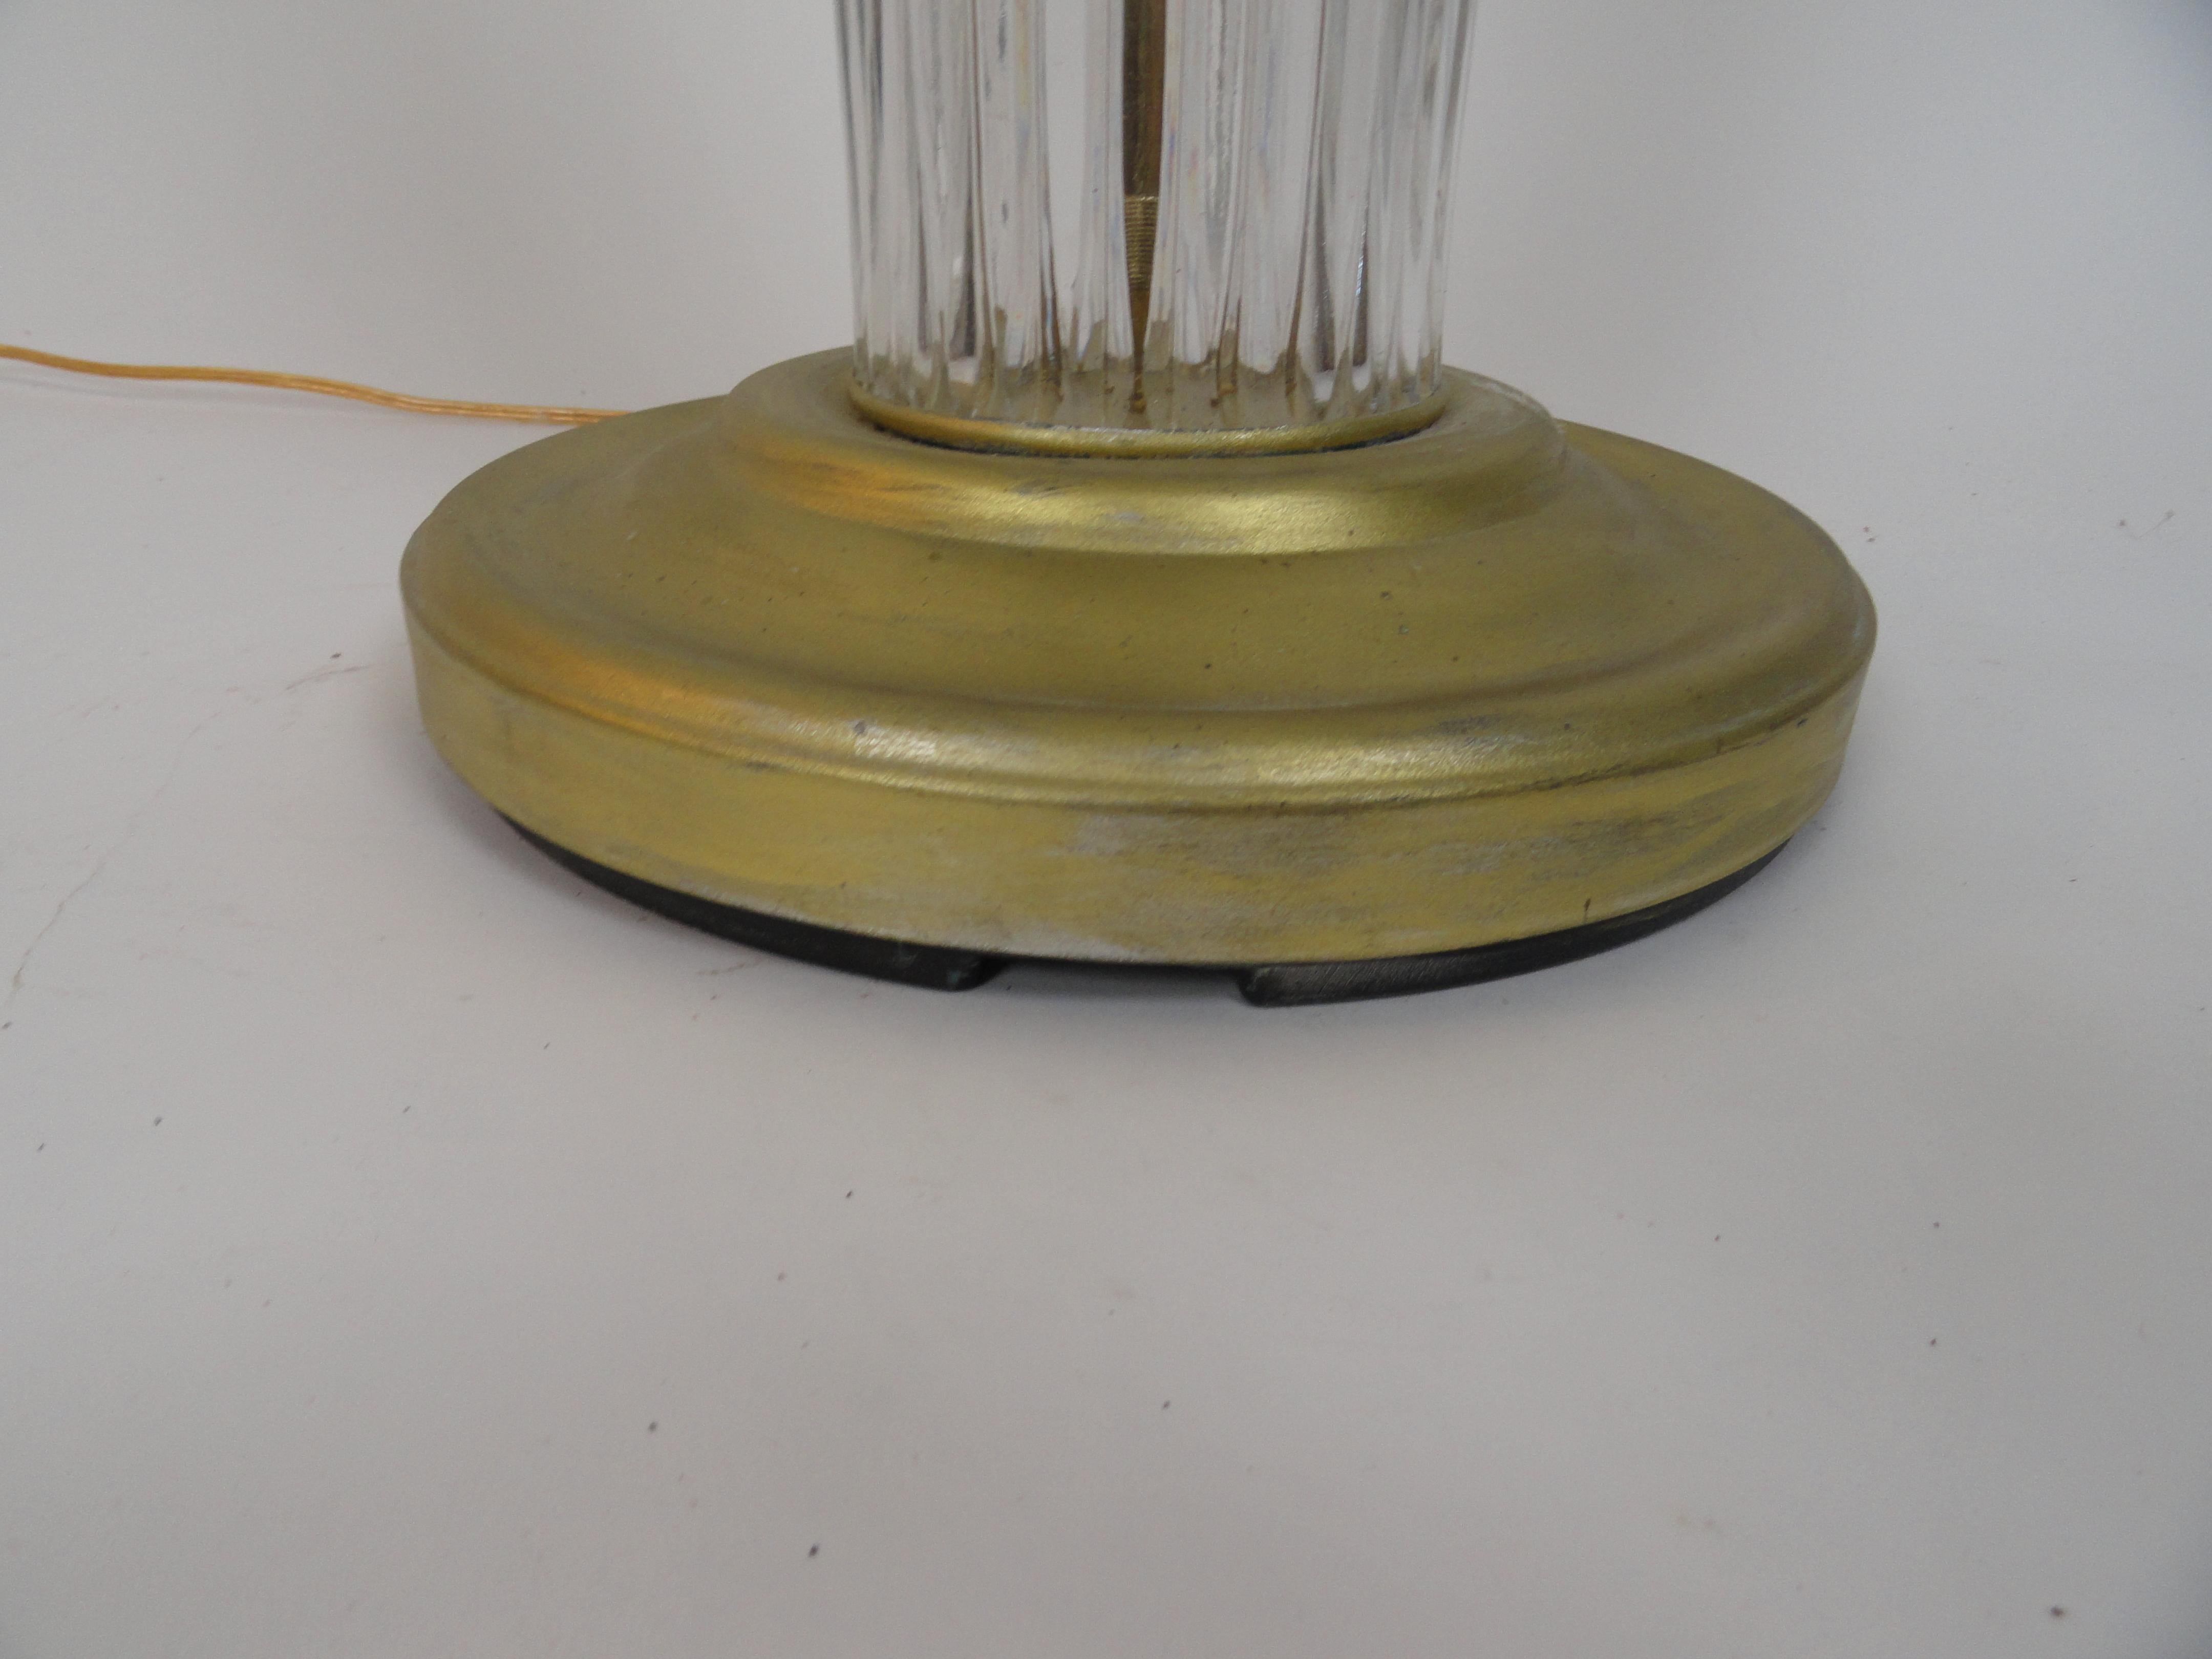 Faceted glass American pole lamp with leafed metal base.